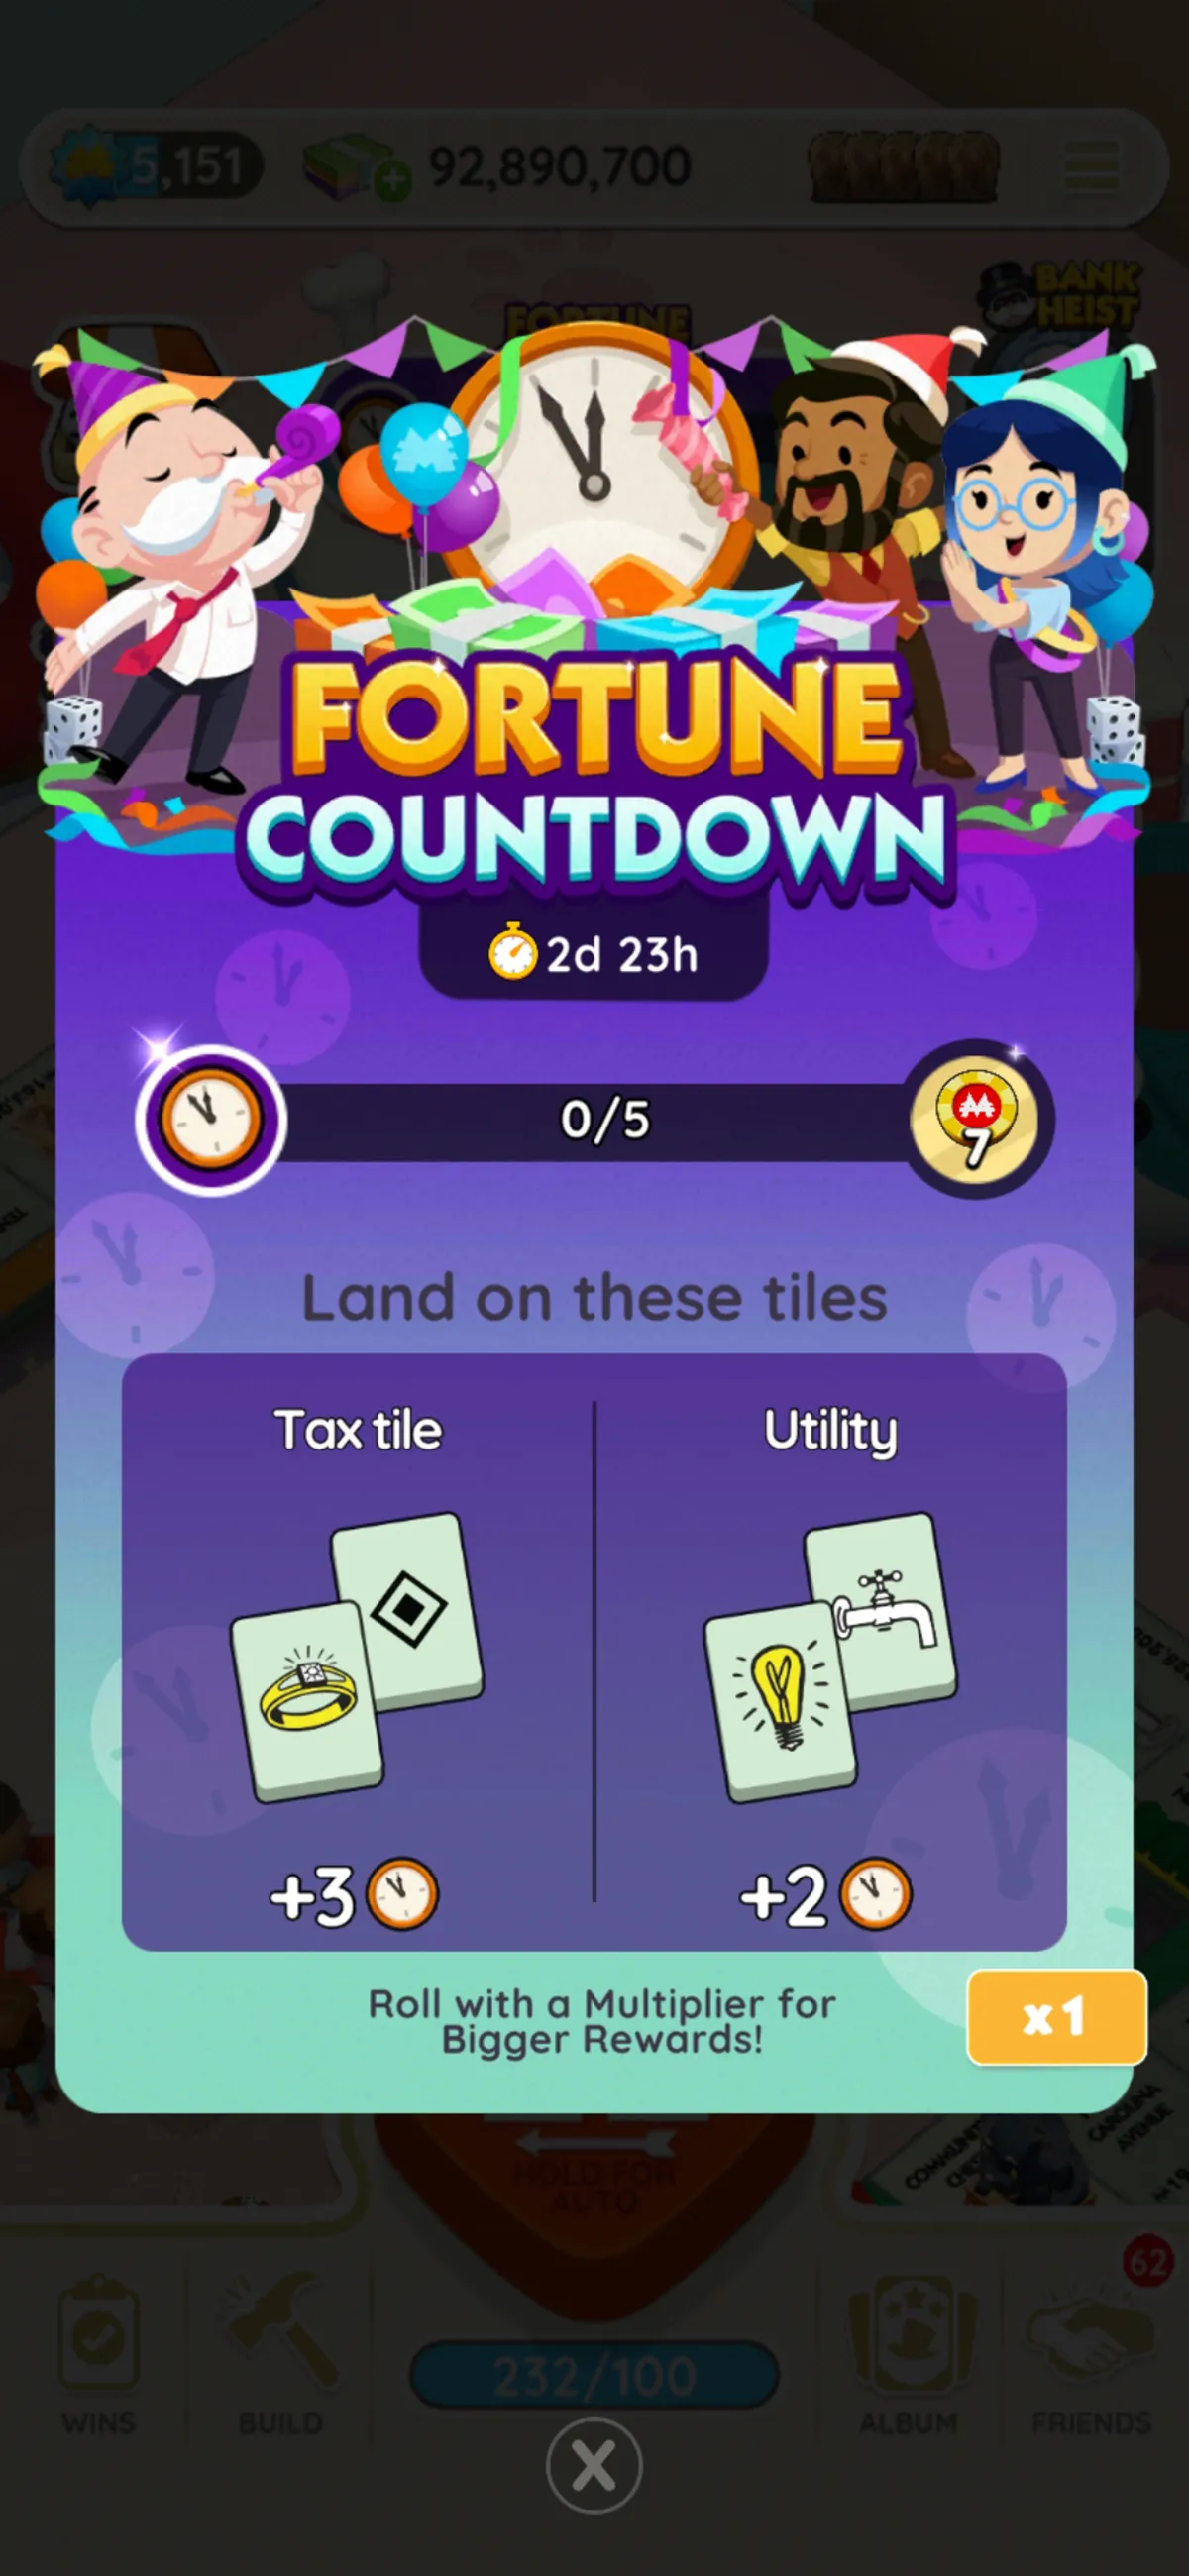 A full-sized image for the Fortune Countdown event in Monopoly GO showing Mr. Monopoly partying with some friends around a giant clock with streamers. The image is part of a list of all the rewards and milestones in the Fortune Countdown event in Monopoly GO.